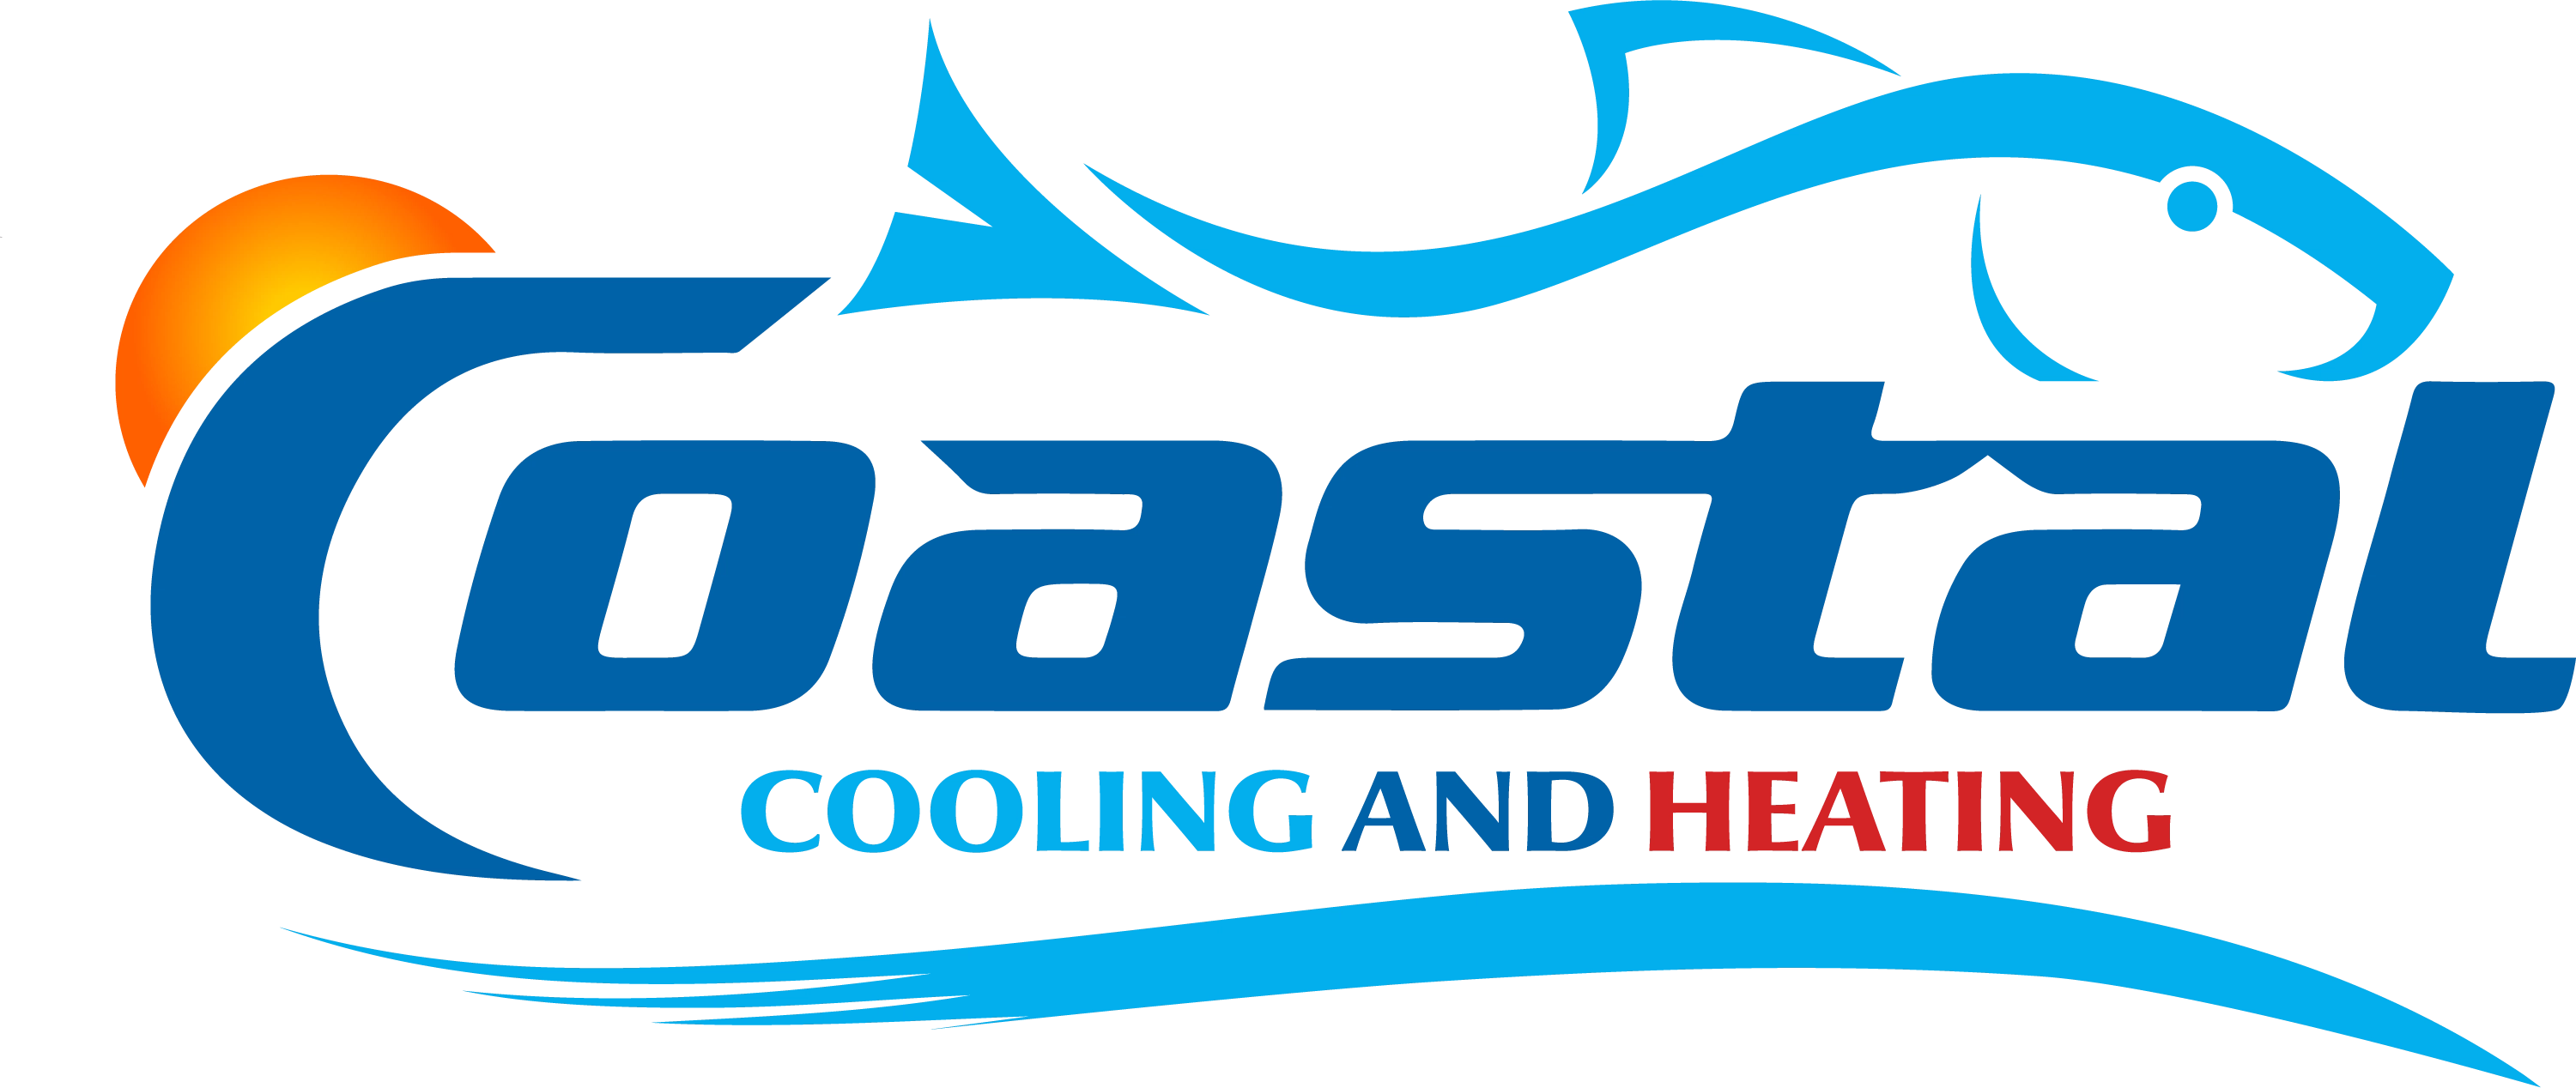 Coastal Cooling and Heating - AC Repair and Installation Company Logo